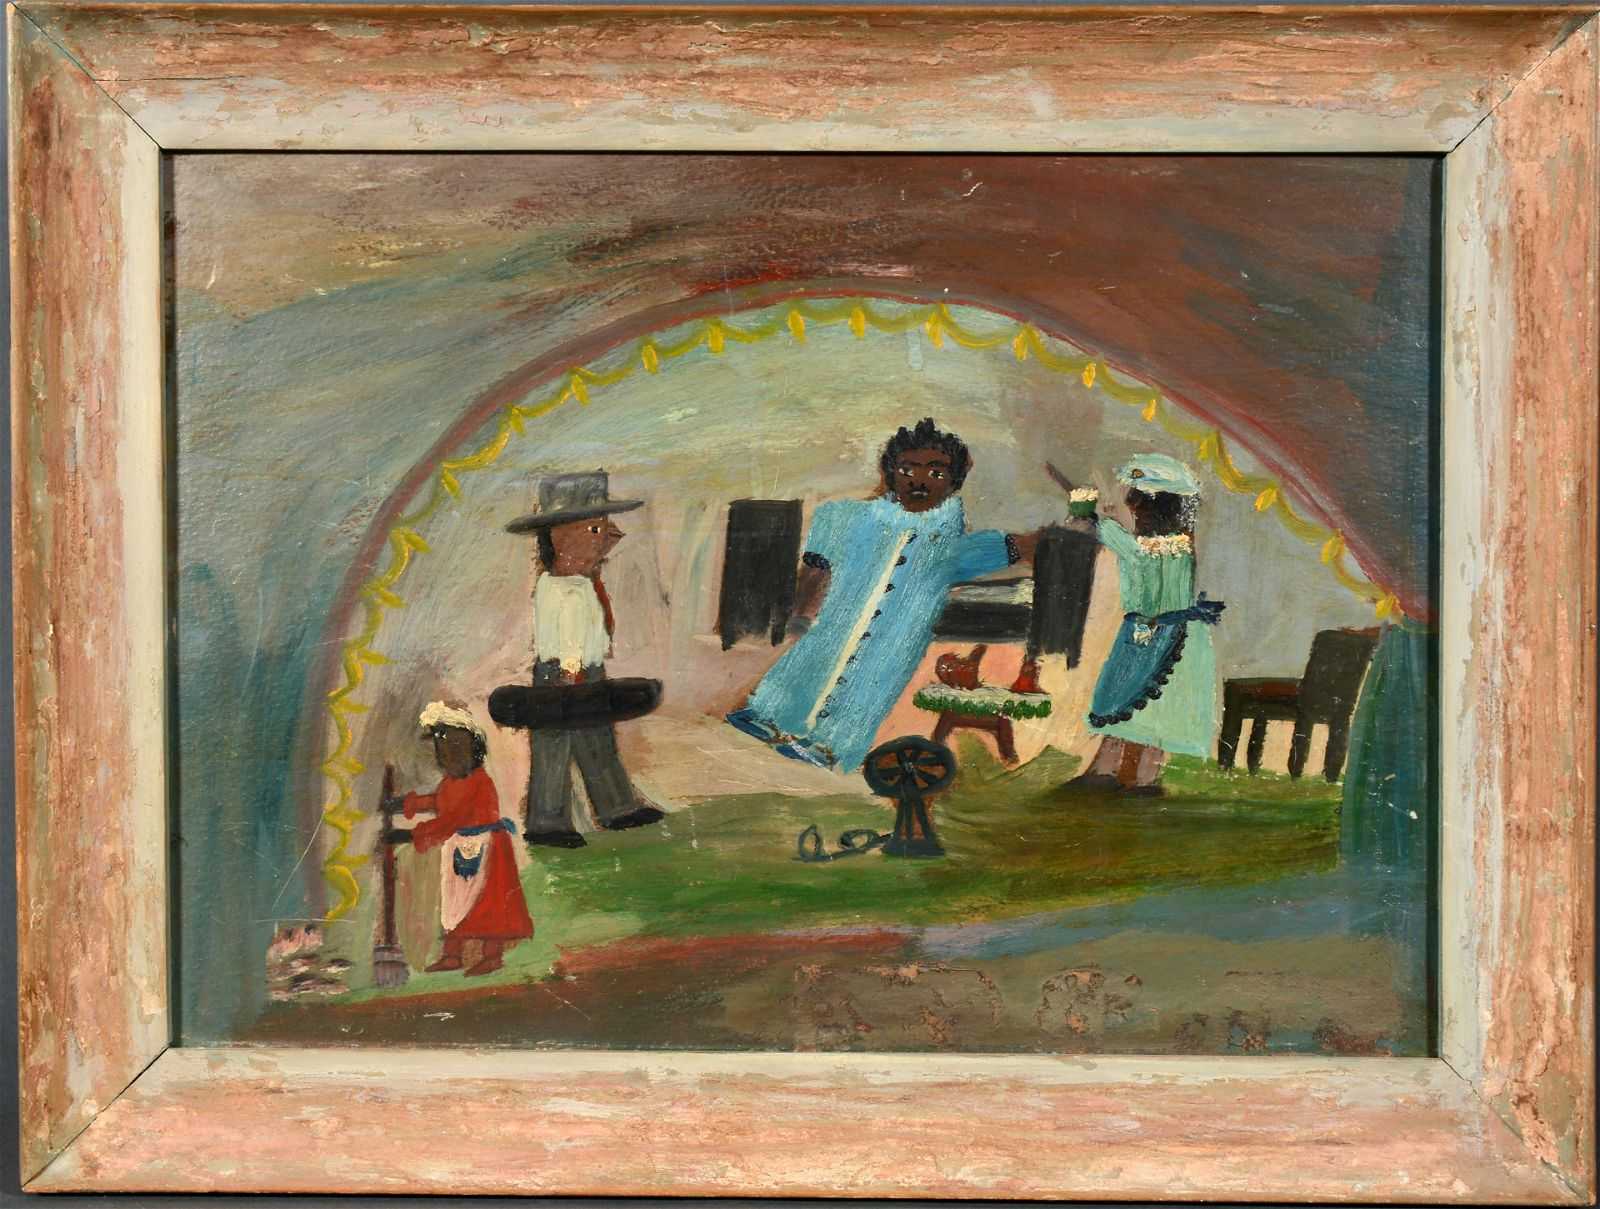 ‘Doctor Comes A’ Callin’’, a circa-1940s work by Clementine Hunter, went for $15,000 plus the buyer’s premium in November 2020. Image courtesy of Slotin Folk Art Auction and LiveAuctioneers.